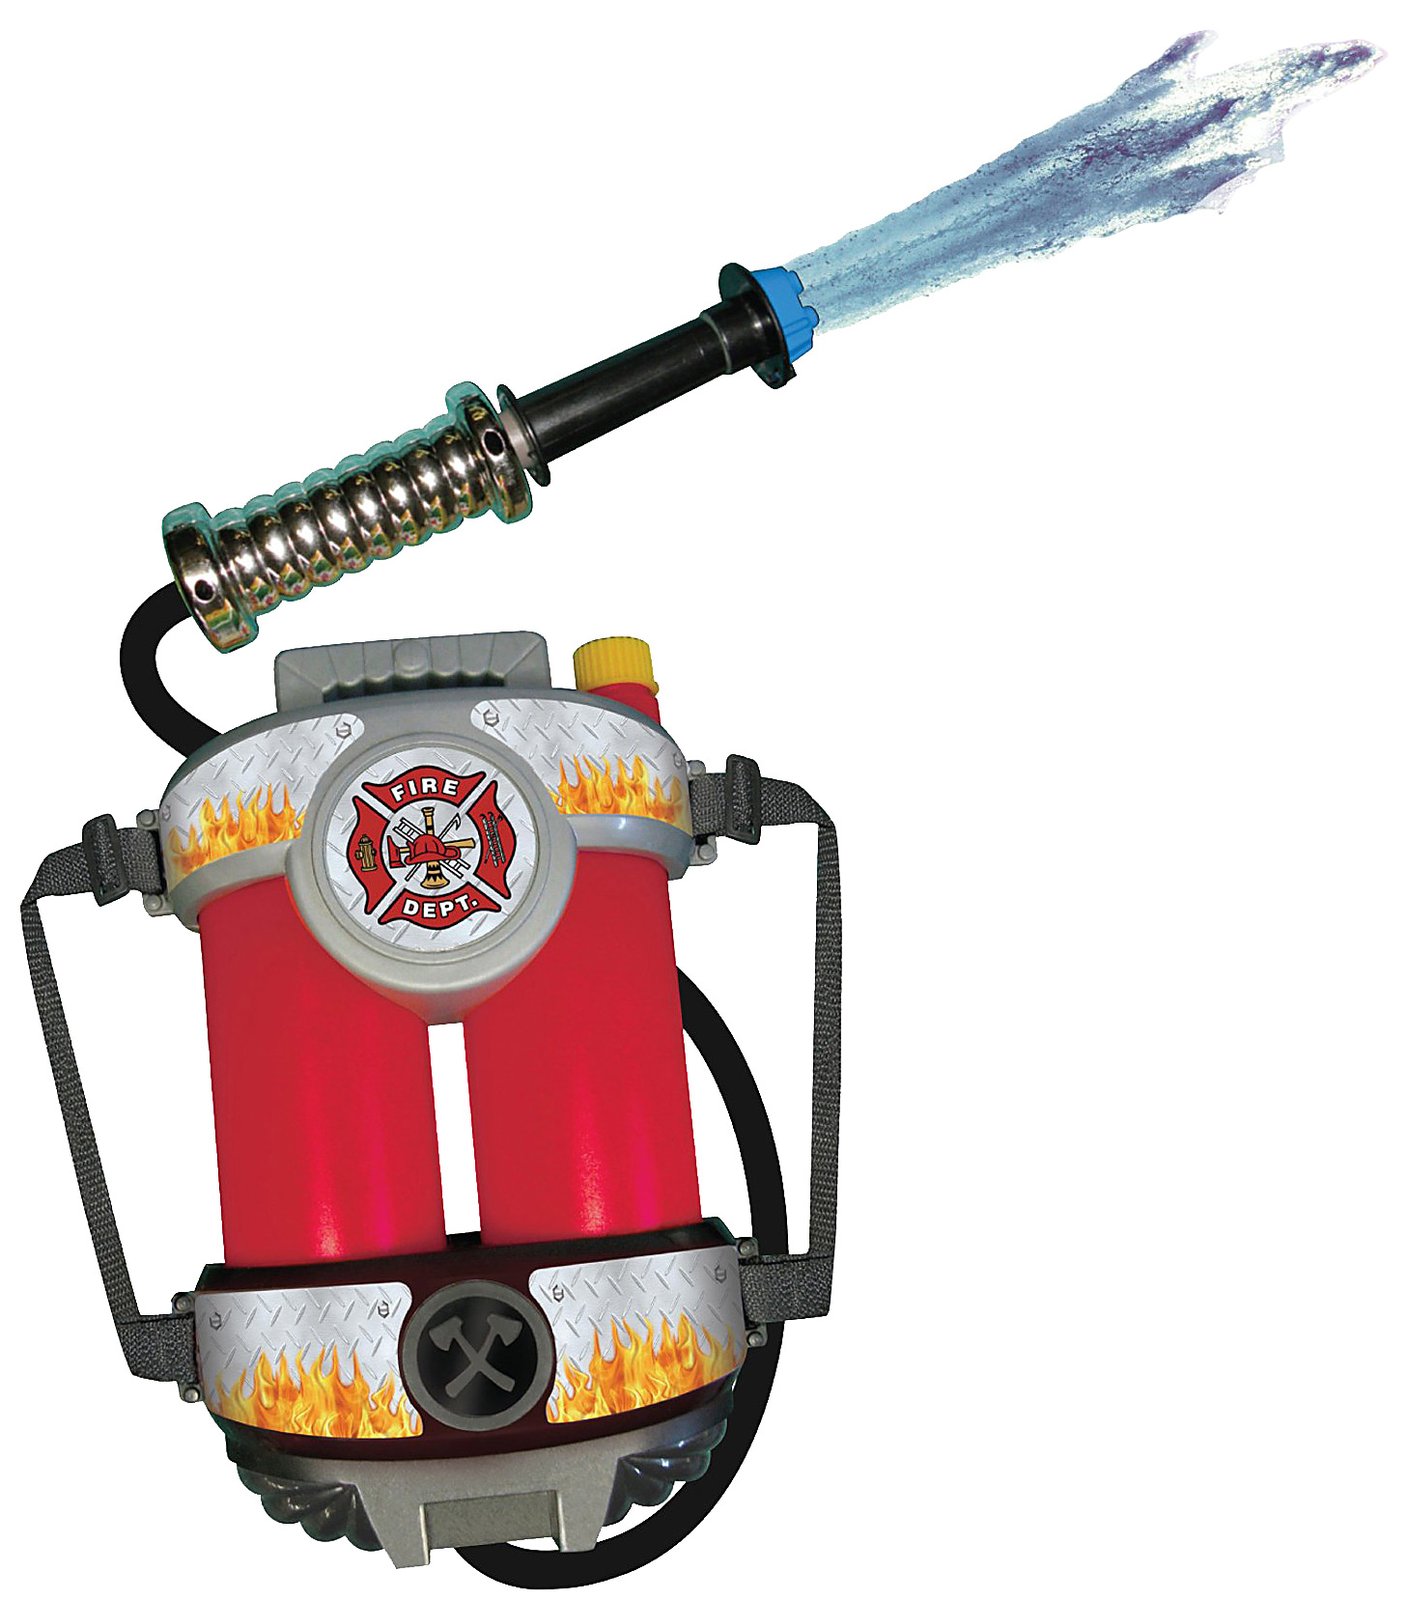 Firefighter Hose Spraying   Clipart Panda   Free Clipart Images